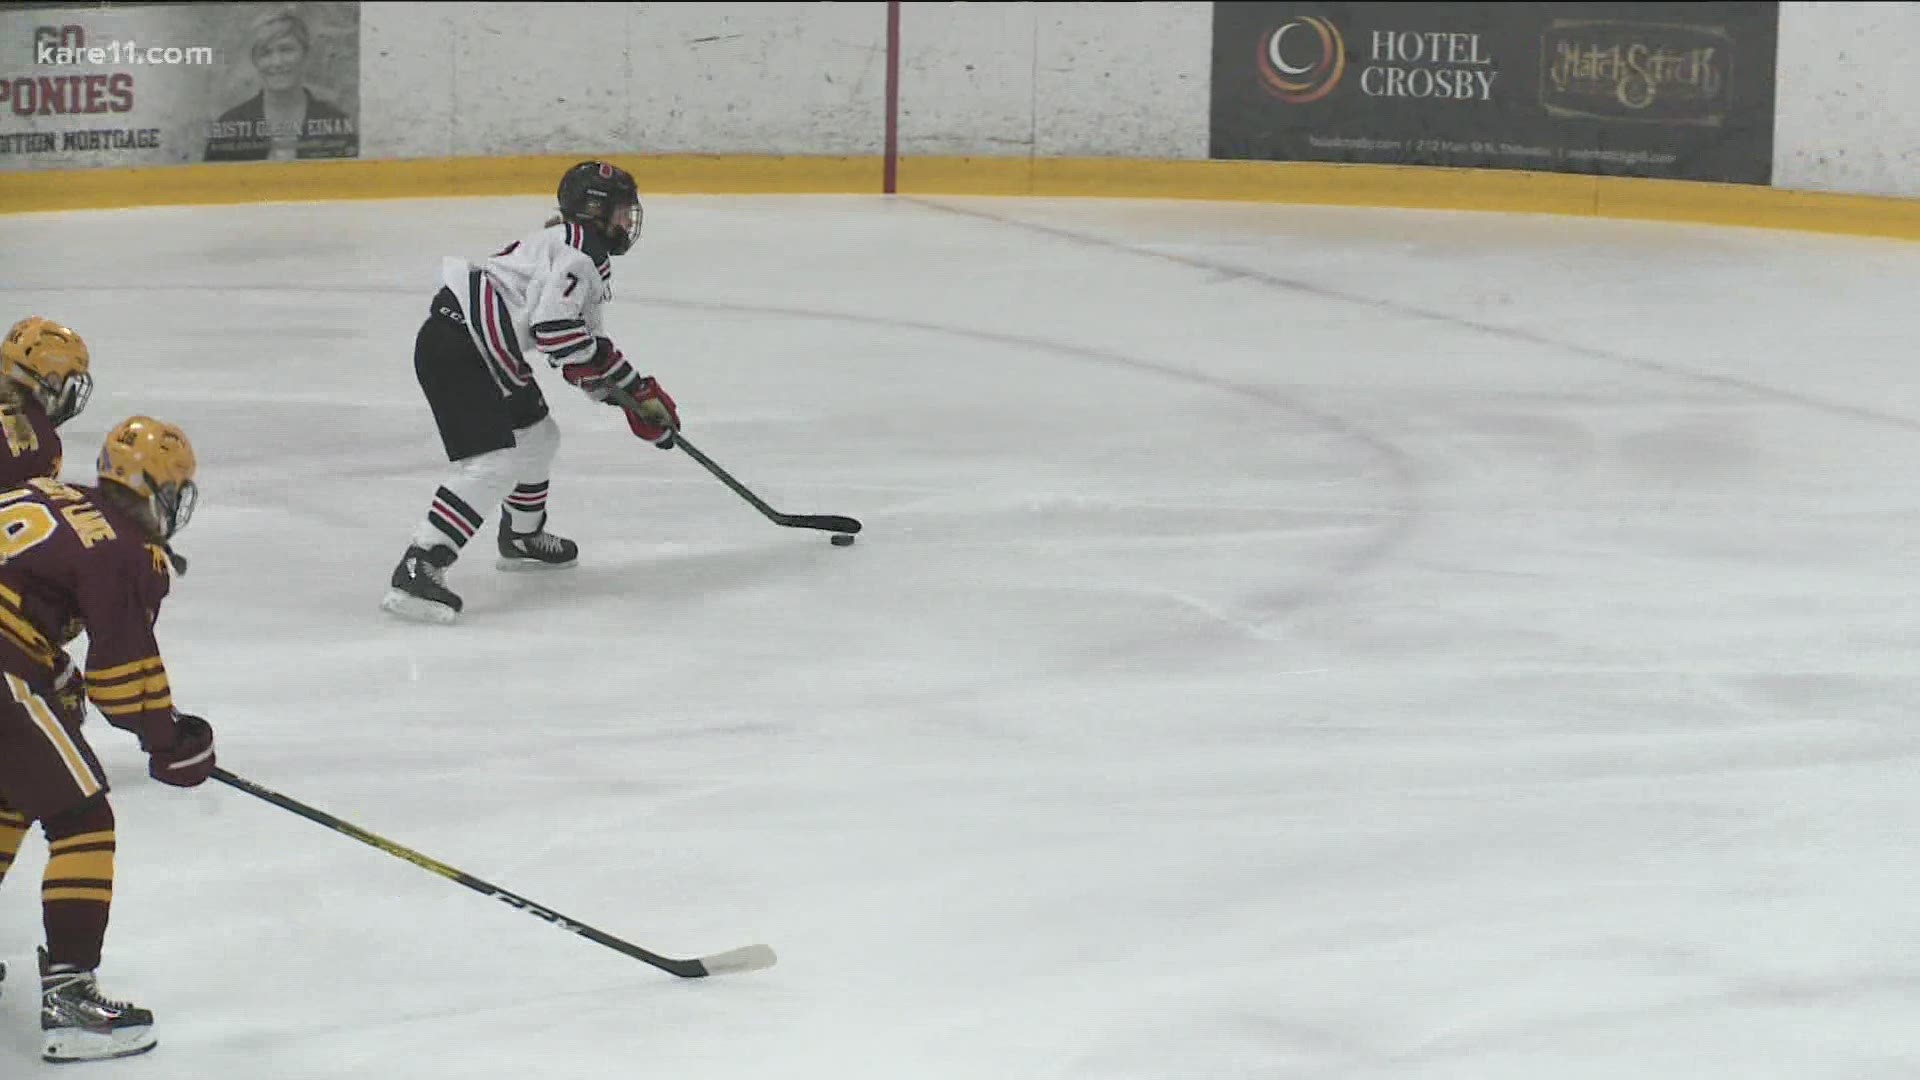 The Stillwater girls hockey team won what is likely Minnesota's first game this high school winter season.